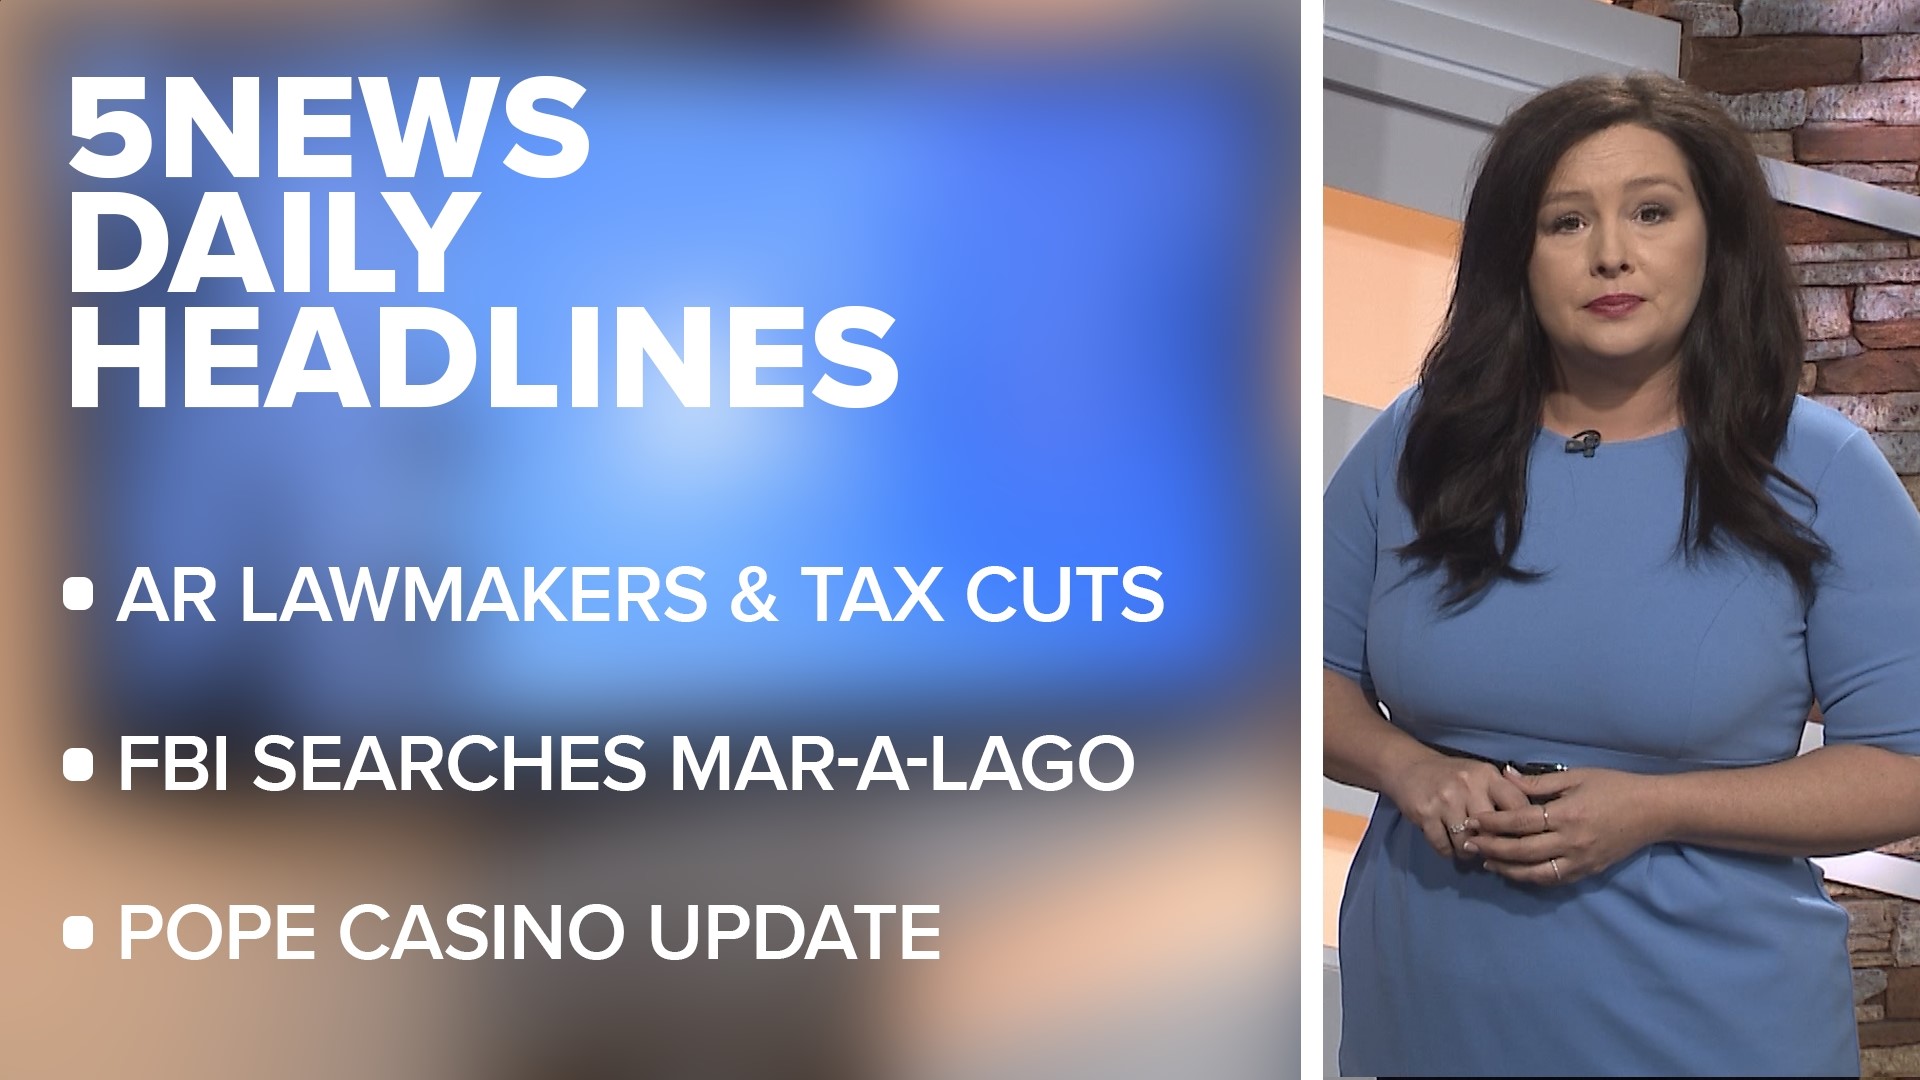 Arkansas lawmakers discuss tax cuts, information on the FBI raiding Trump's Mar-a-lago home, and a Pope County casino update. | Aug. 9. 2022